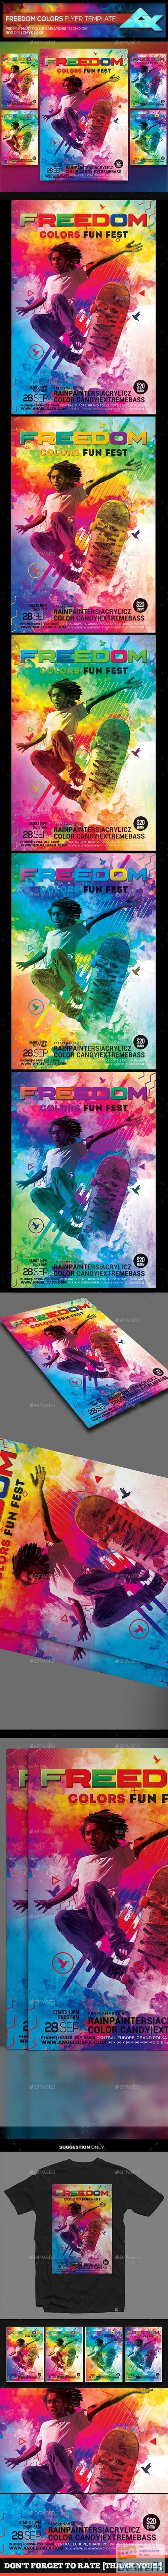 GR - Freedom Colors Fun Fest Photoshop Flyer Template 22356183